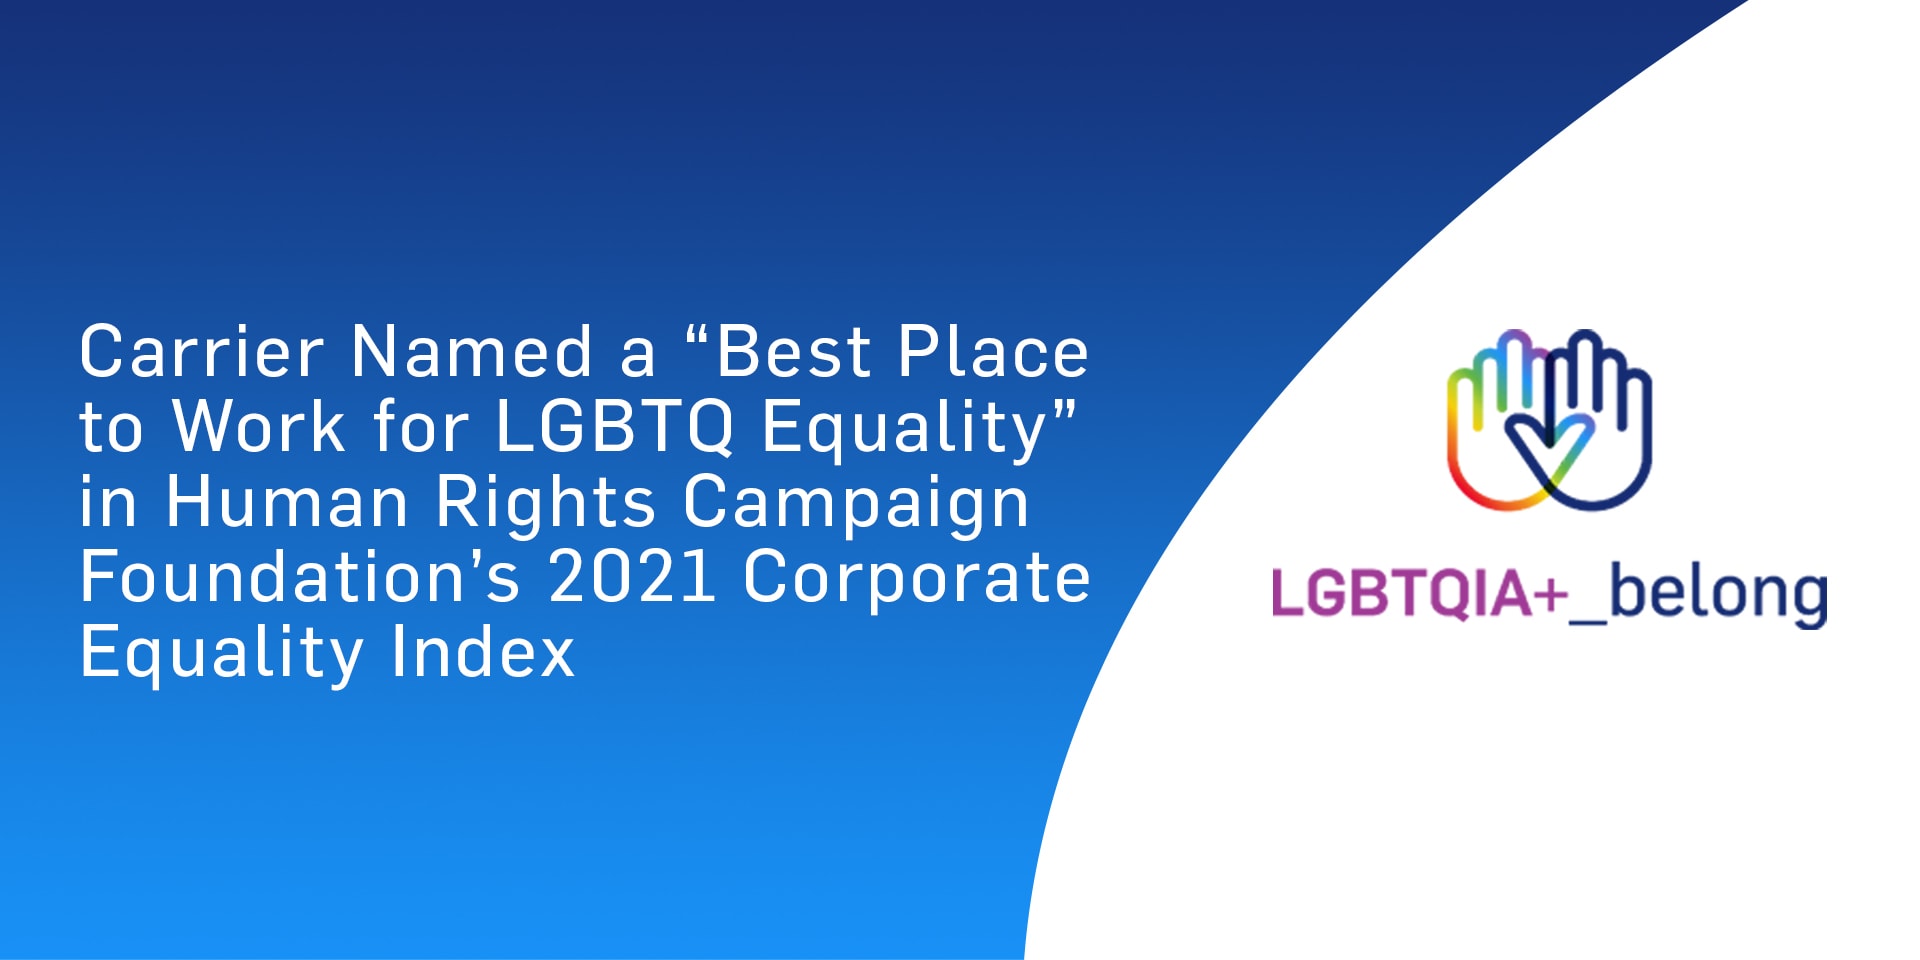 Carrier Achieves Perfect Score in Corporate Equality Index